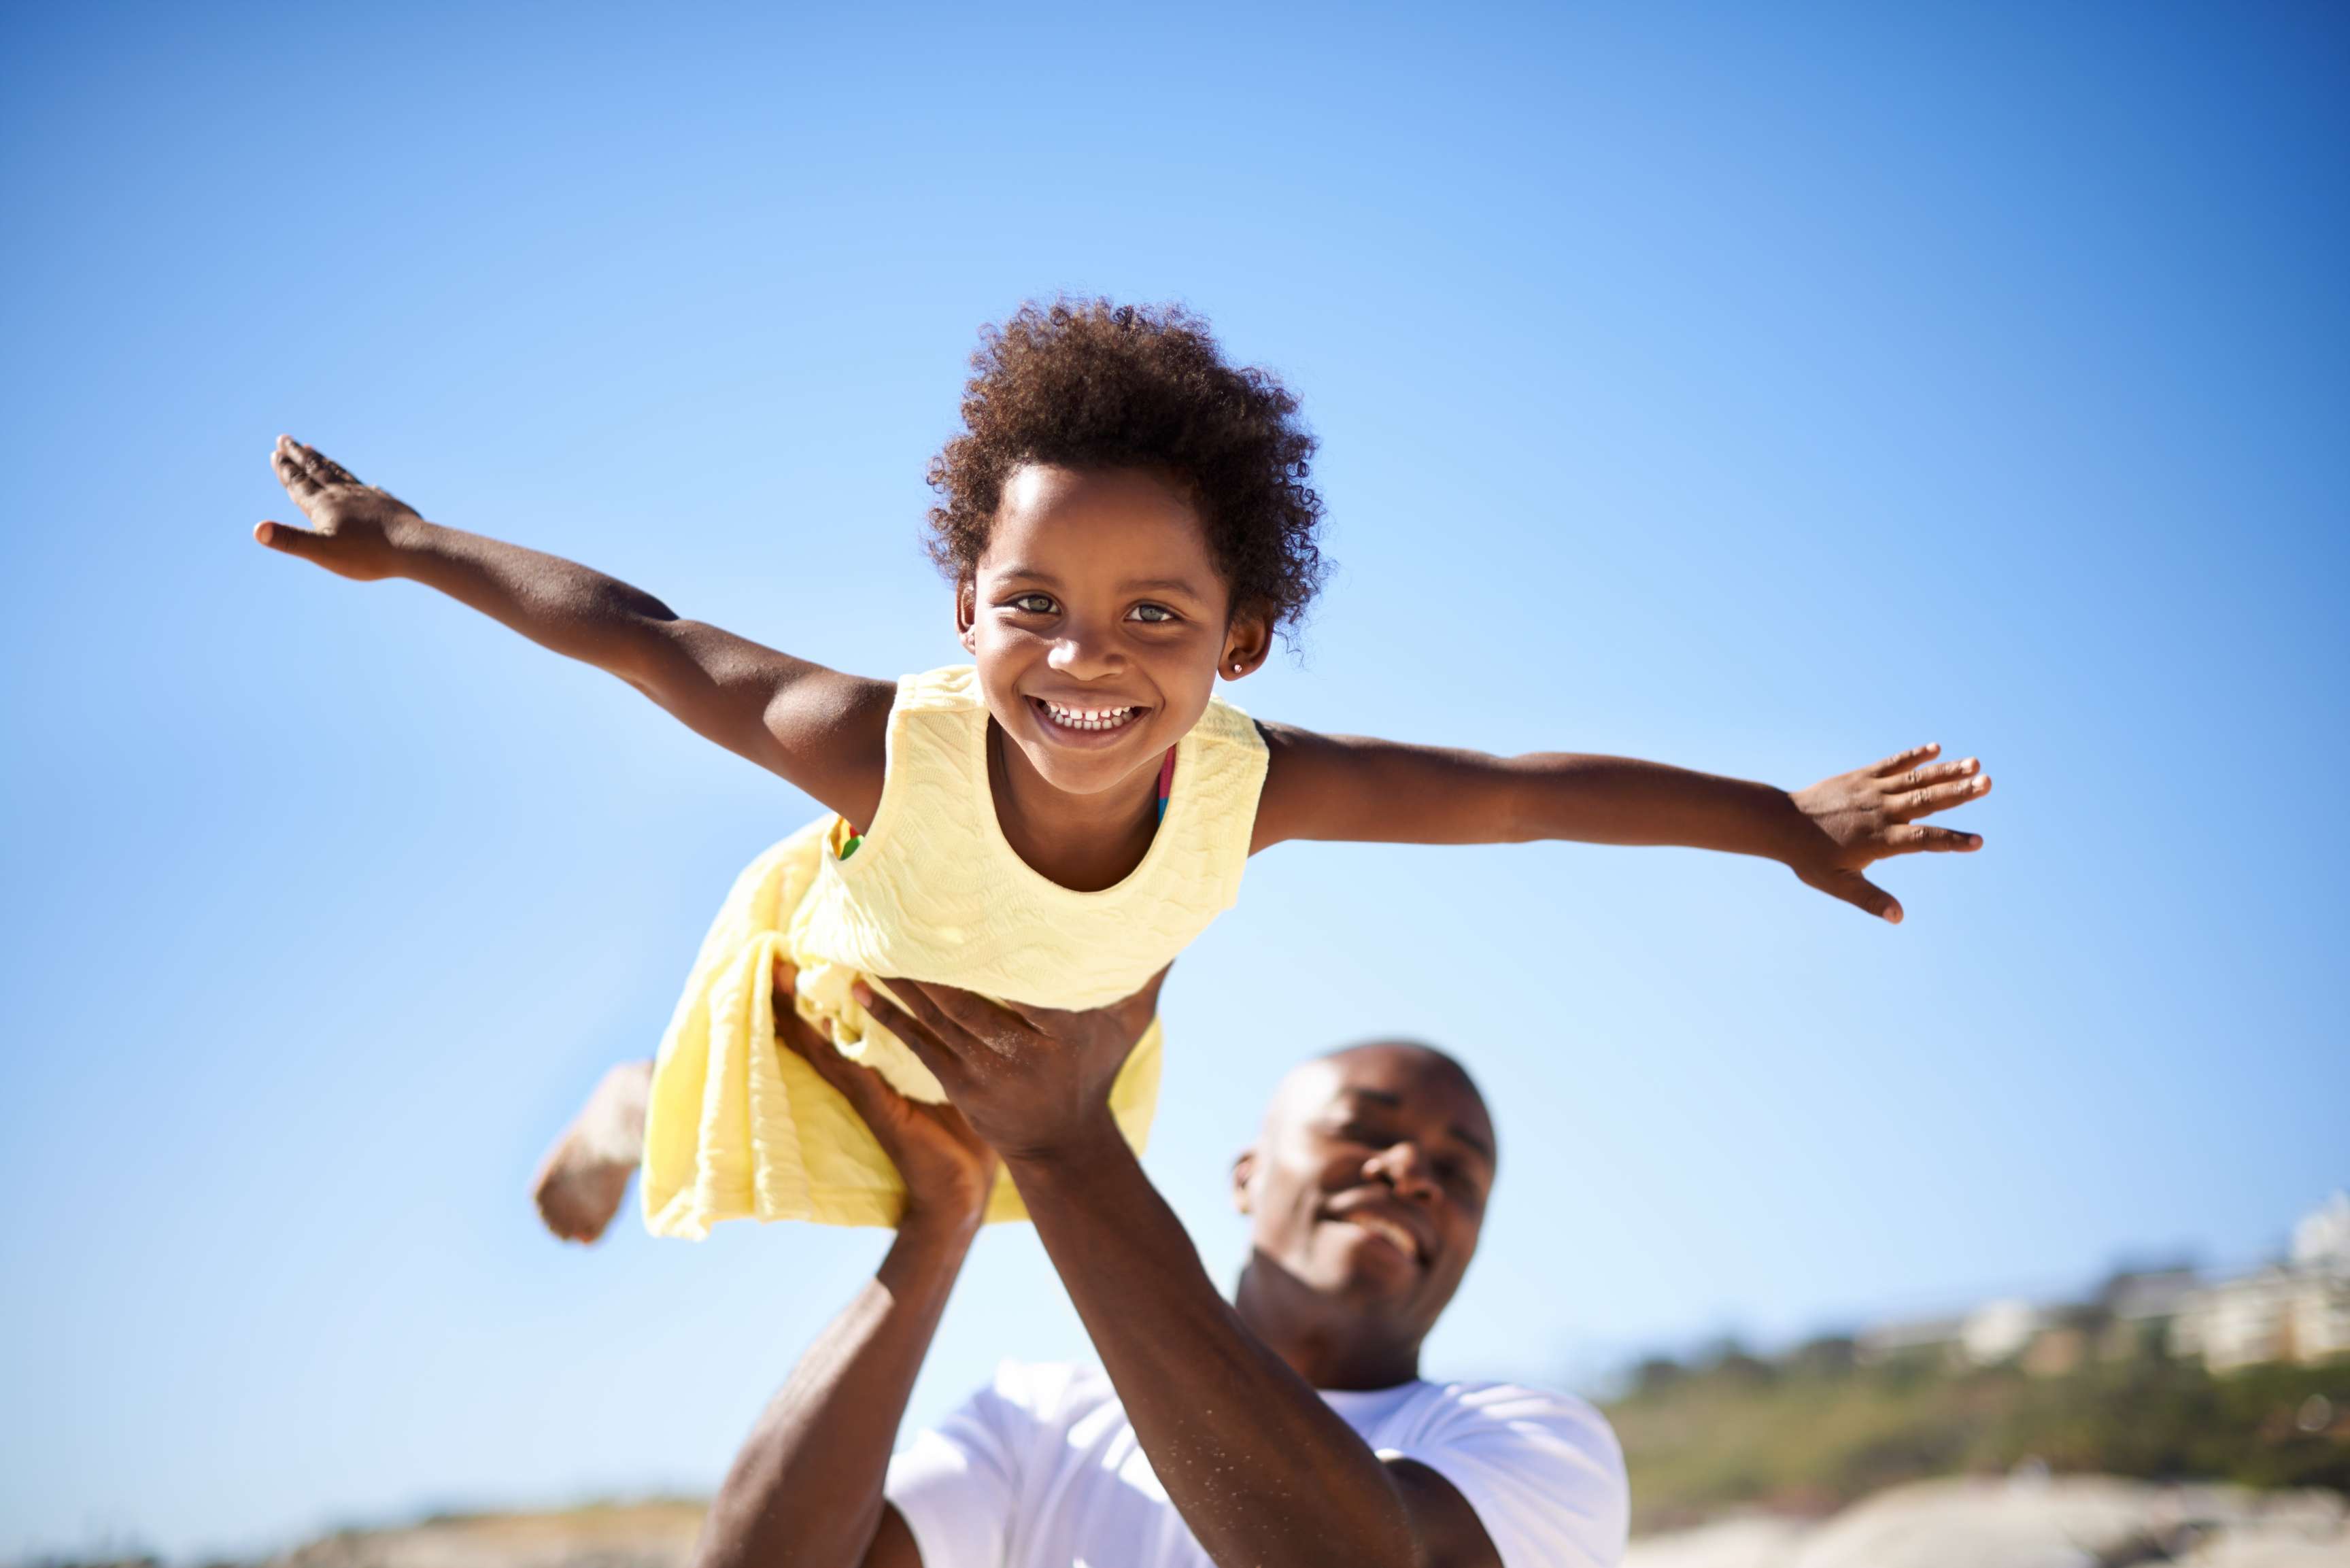 A man holds up his child and the child pretends to fly; both laugh and have fun.